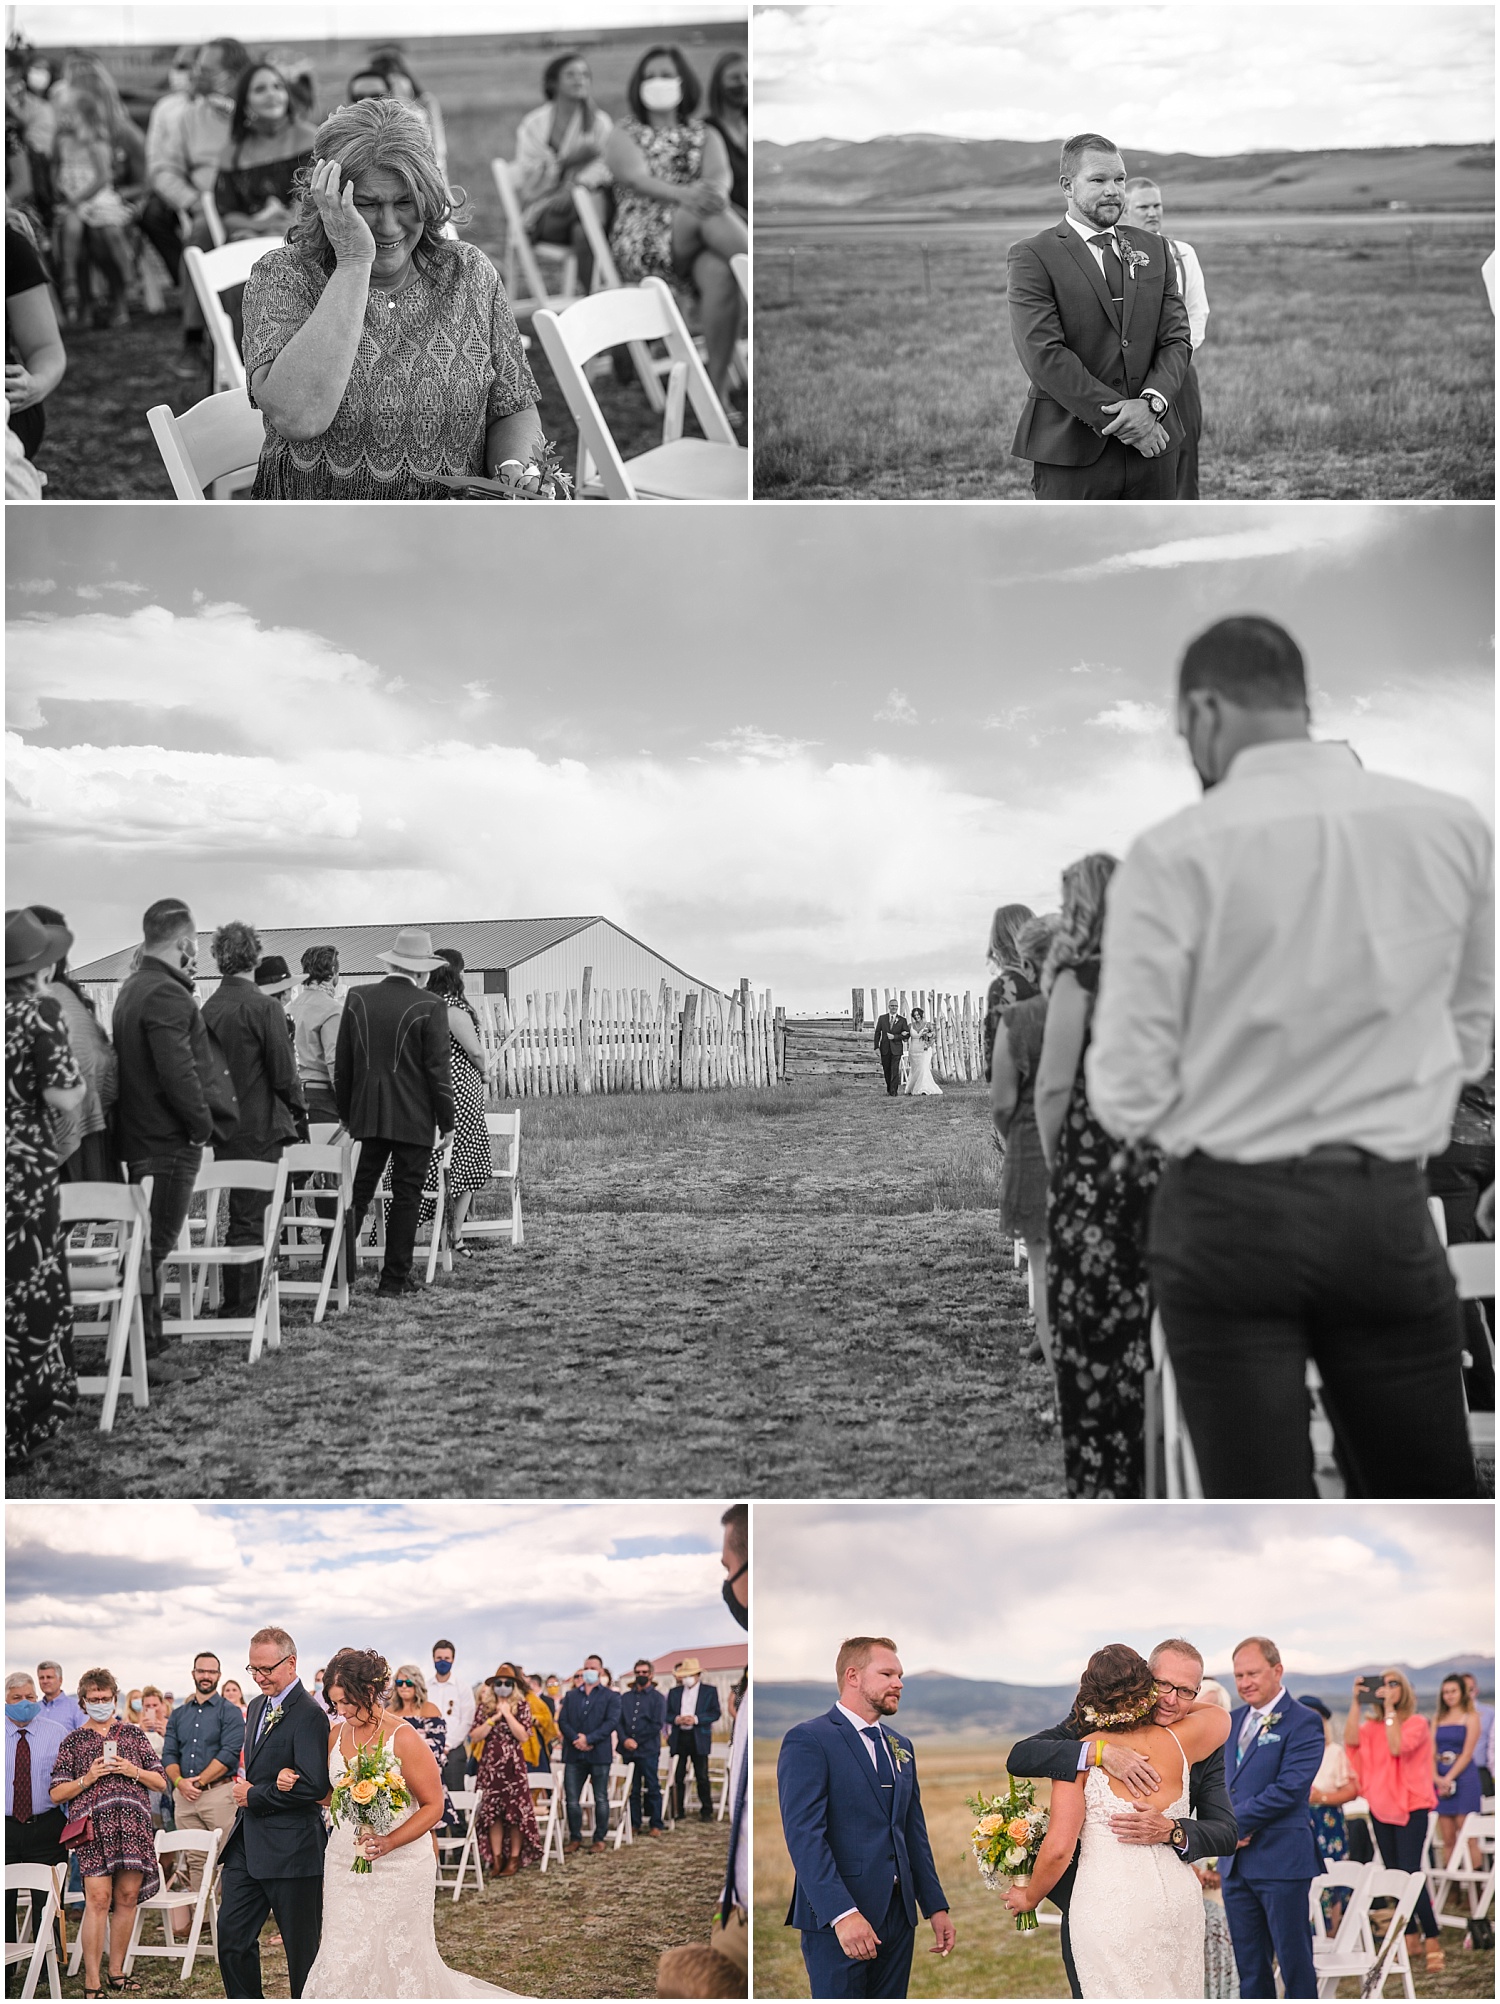 Guyton Ranch wedding ceremony in a field overlooking mountains near Fairplay Colorado